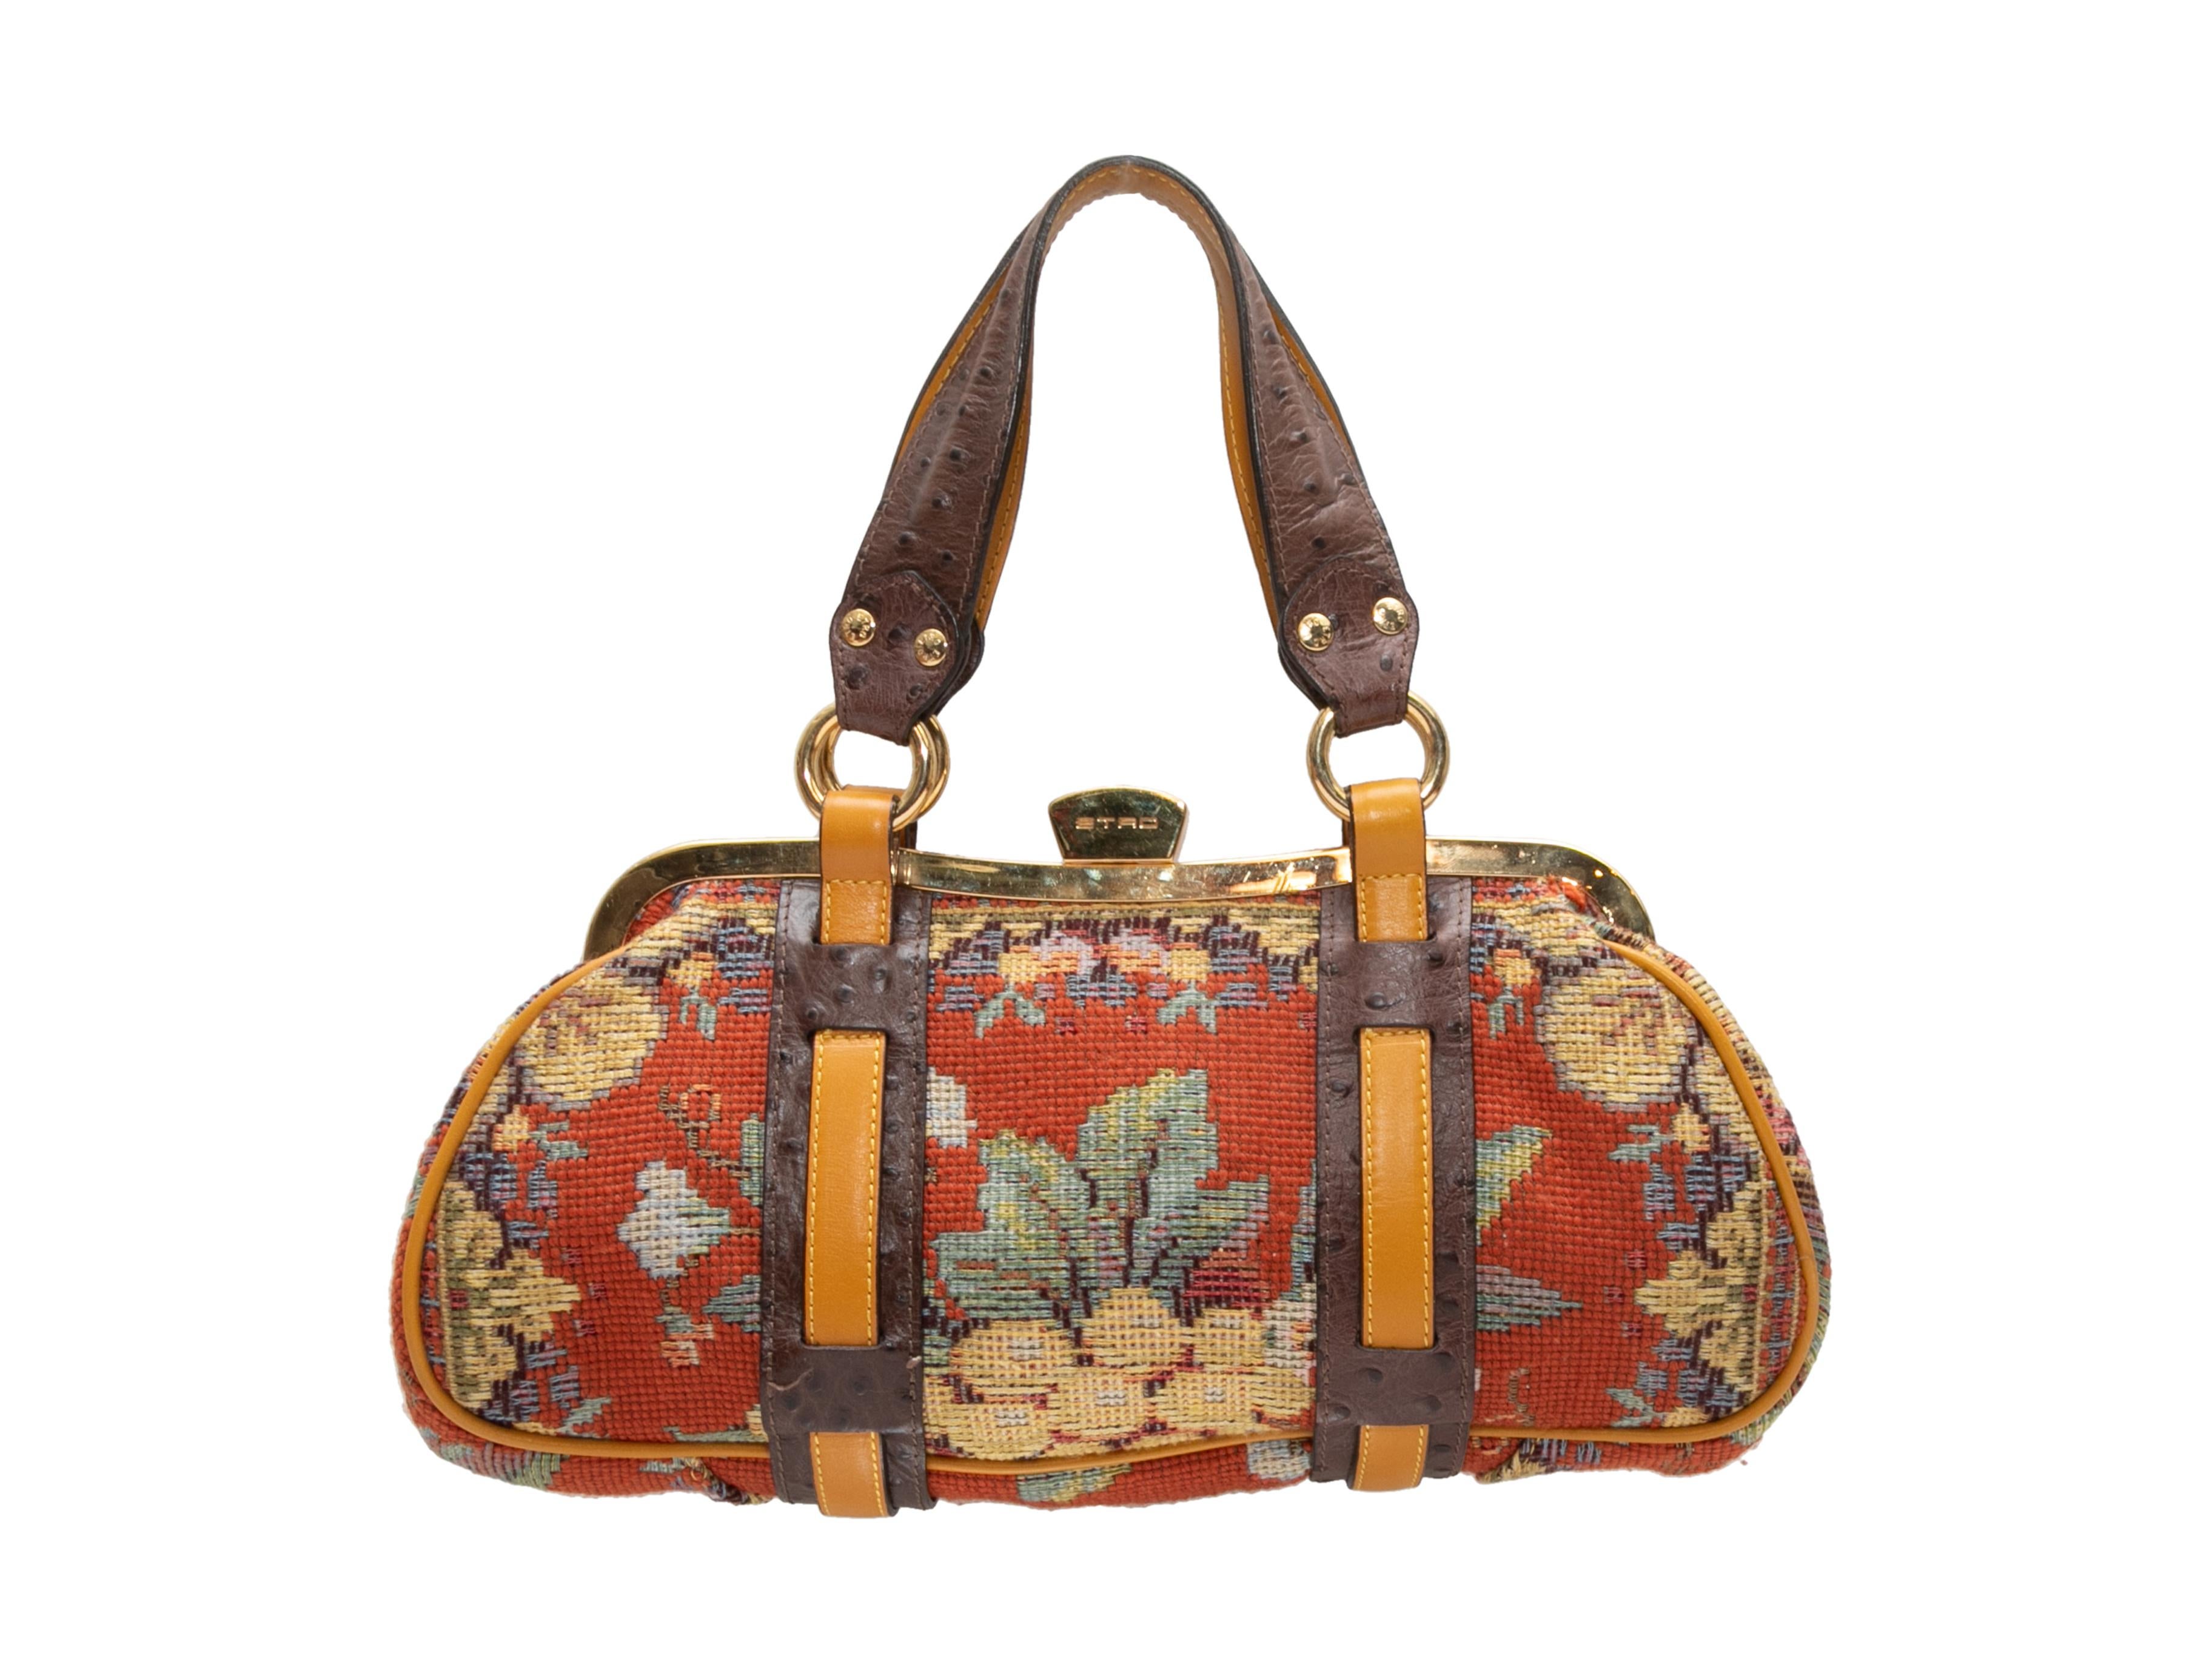 Orange & Multicolor Etro Needlepoint Patterned Handbag. This handbag features a needlepoint body, gold-tone hardware, leather trim, dual shoulder straps, and a top clasp closure. 13.25